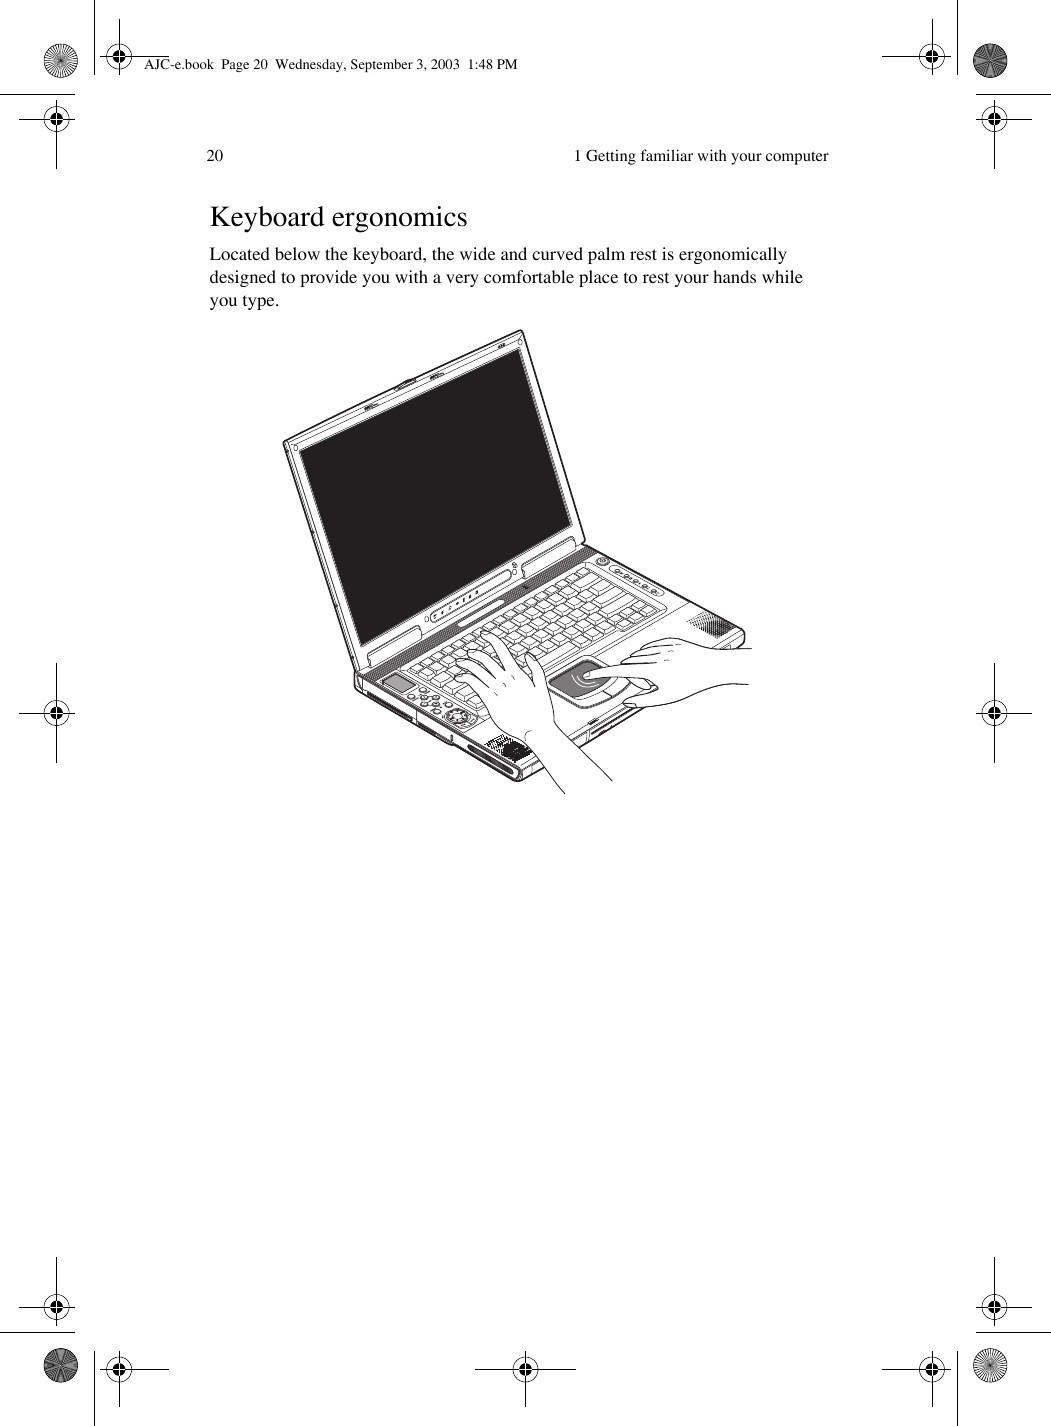  1 Getting familiar with your computer20Keyboard ergonomicsLocated below the keyboard, the wide and curved palm rest is ergonomically designed to provide you with a very comfortable place to rest your hands while you type.  AJC-e.book  Page 20  Wednesday, September 3, 2003  1:48 PM